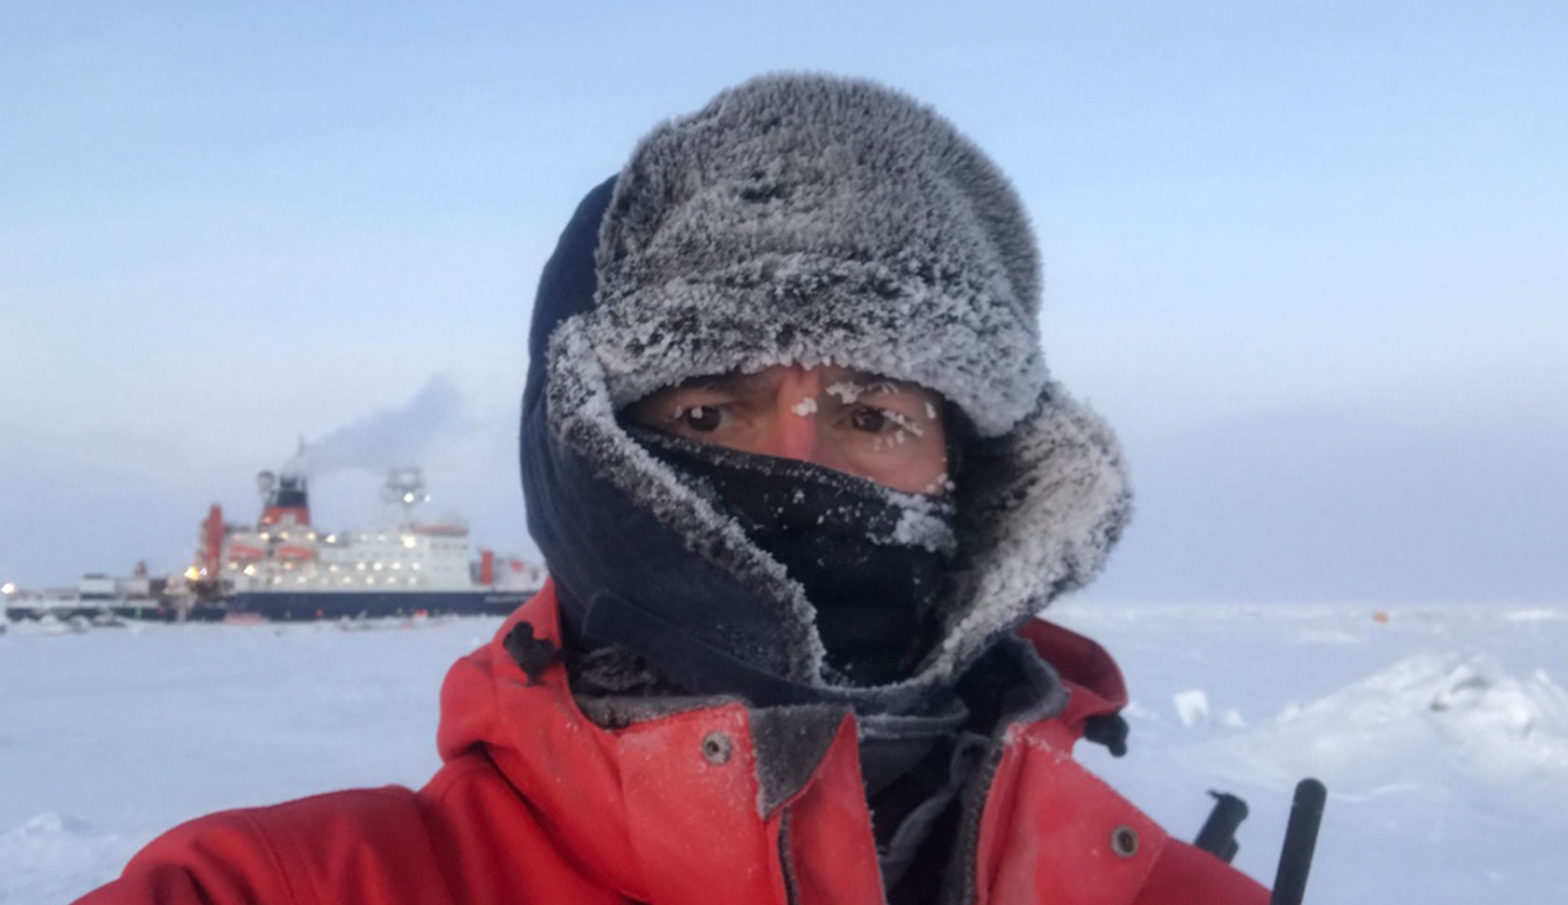 Chris Marsay, UGA scientist at the Skidaway Institute of Oceanography, is two hours into his shift as a bear guard, with the Polarstern vessel in the background.